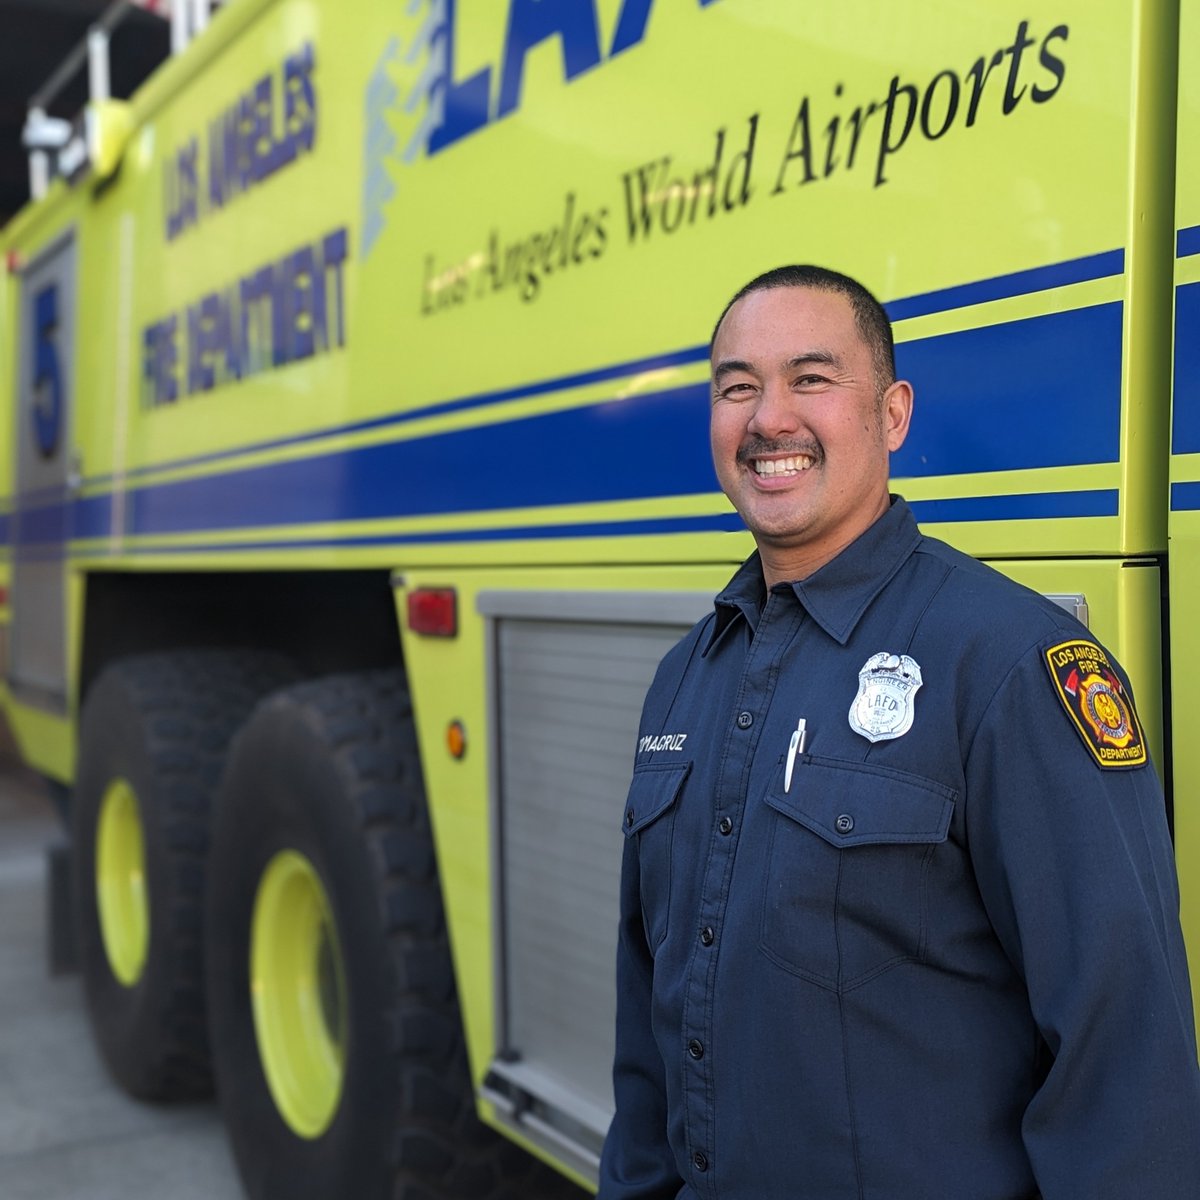 Introducing February's Firefighter of the Month: Firefighter/Engineer Ronald Tomacruz, stationed at Fire Station 80, LAX. Click the link to discover more about his remarkable story. bit.ly/42mWvrd